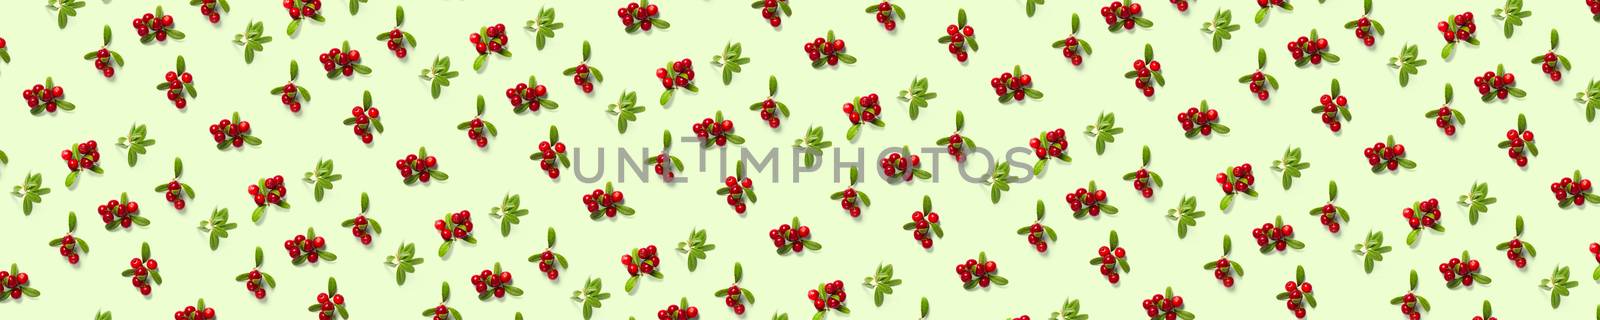 Lingonberry background on green backdrop. Fresh cowberries or cranberries with leaves as autumn or christmas background